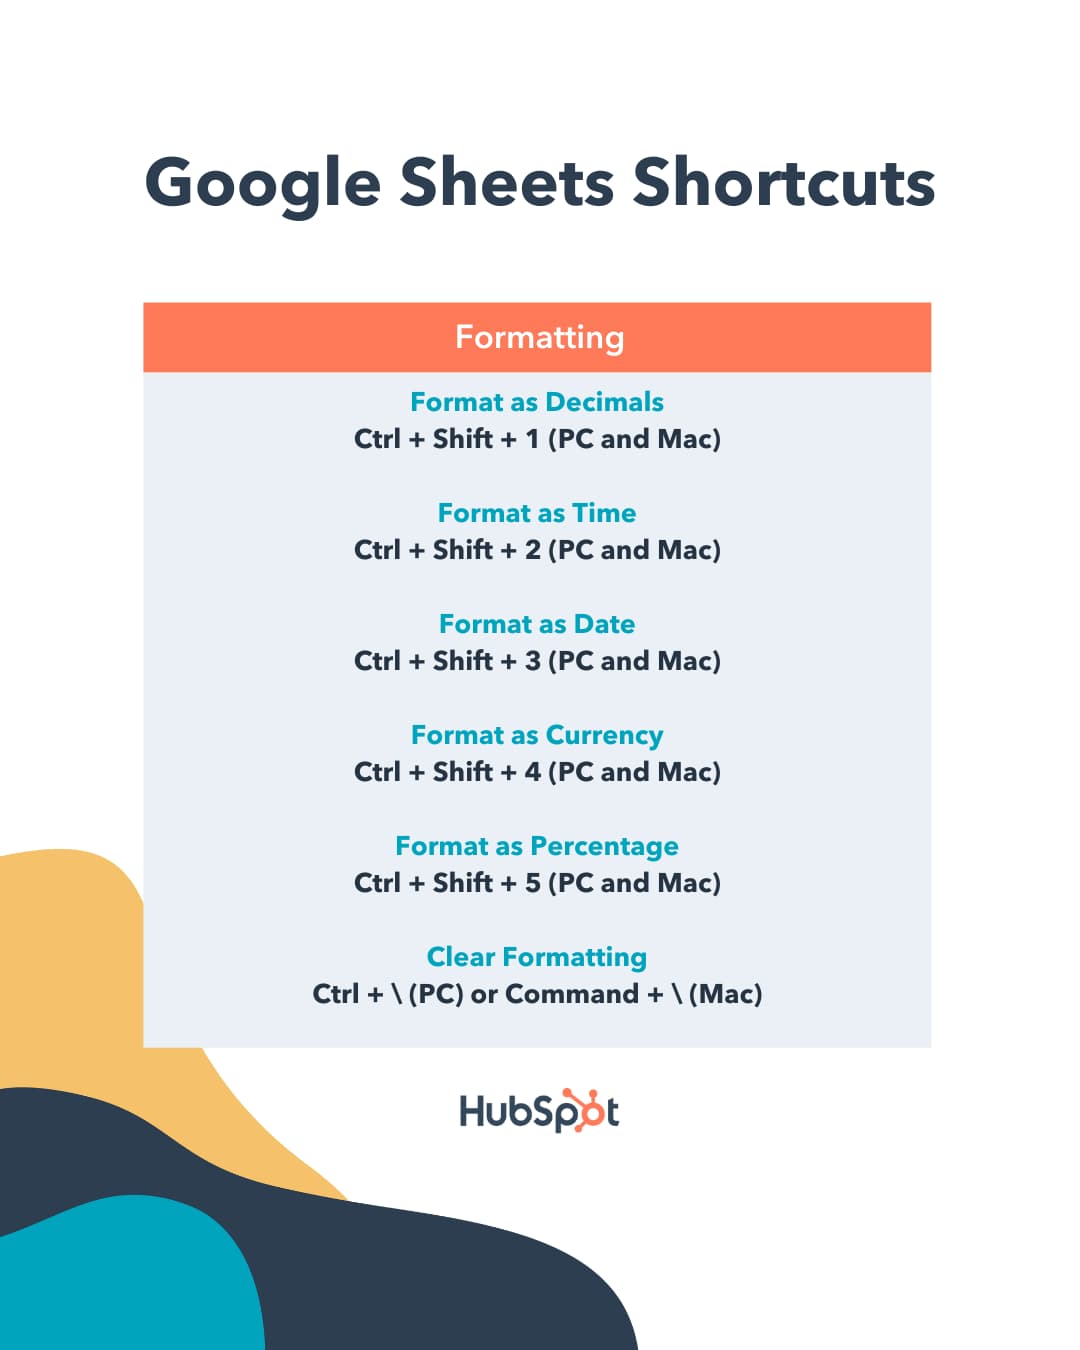 Use Google Spreadsheets shortcuts to format as decimals, time, date, currency, percentage, or to clear the format 